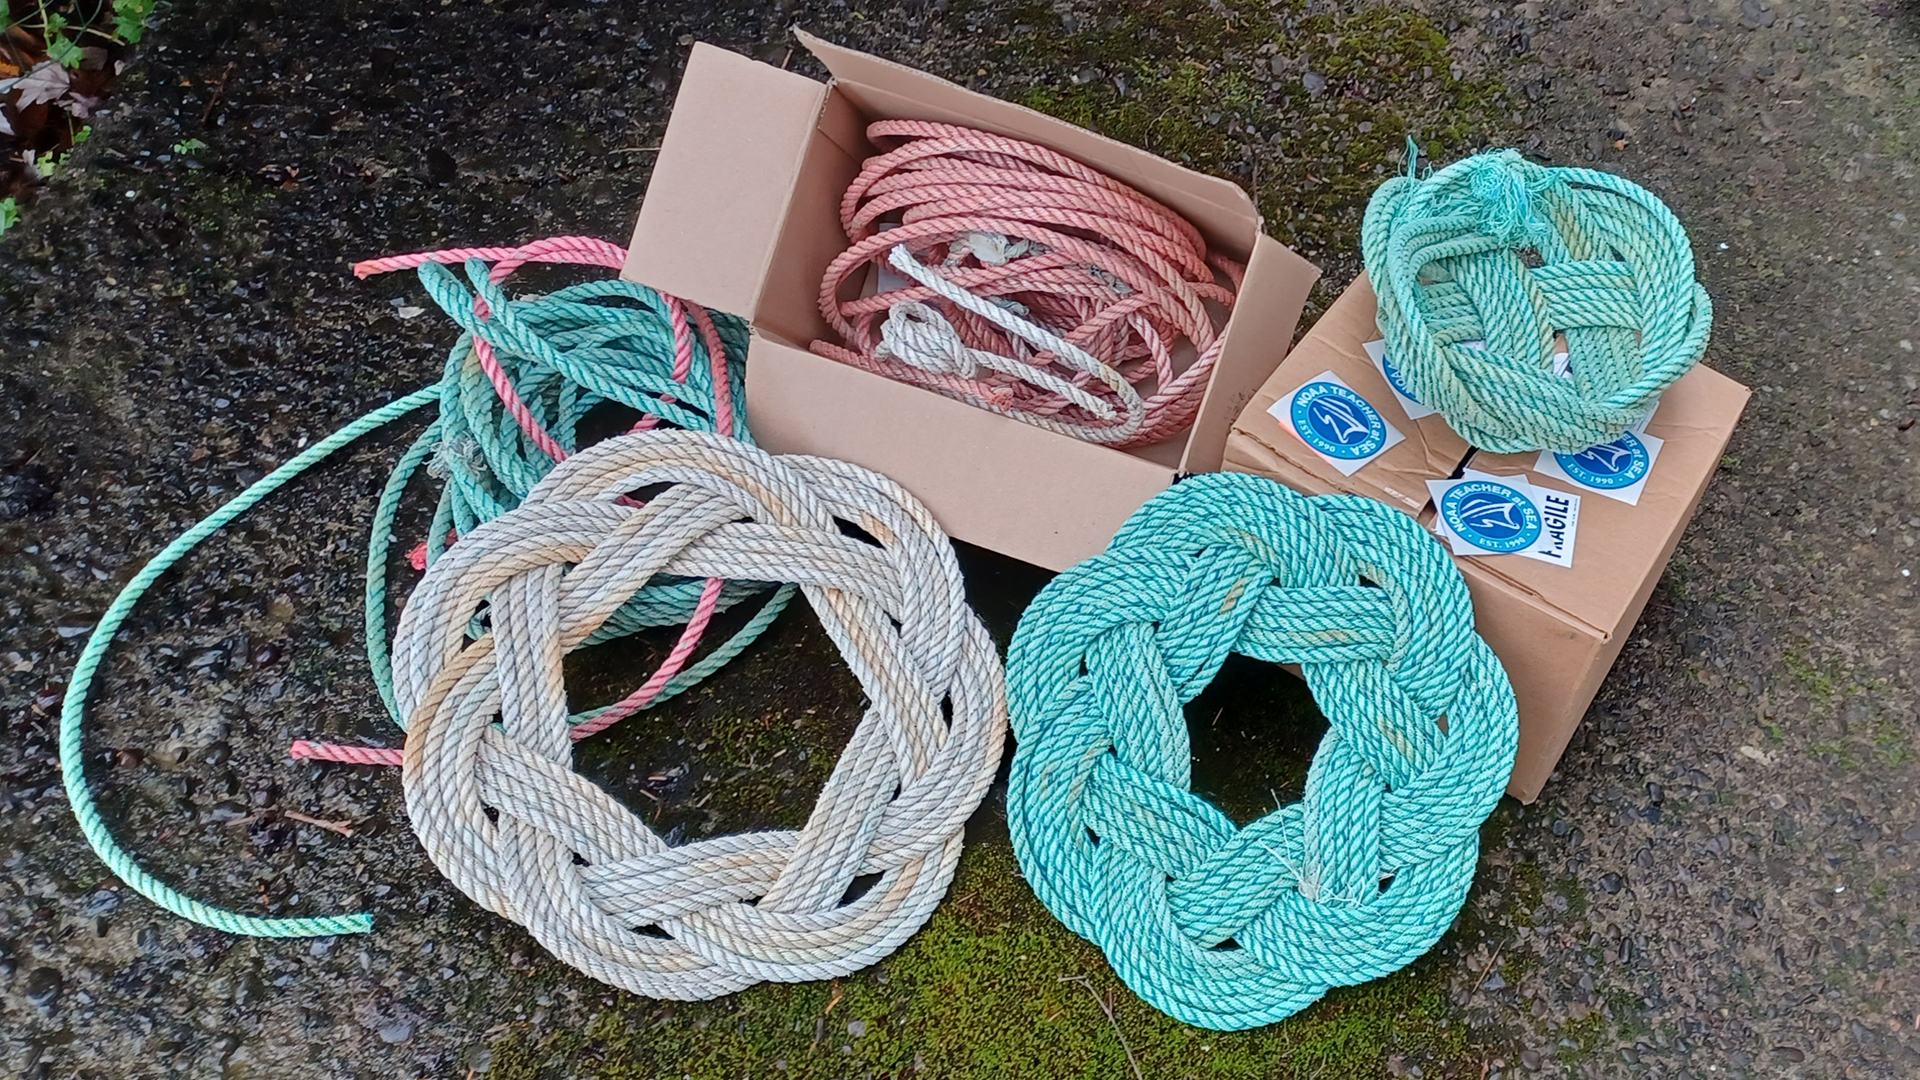 Rope wreaths and rope basket plus raw materials